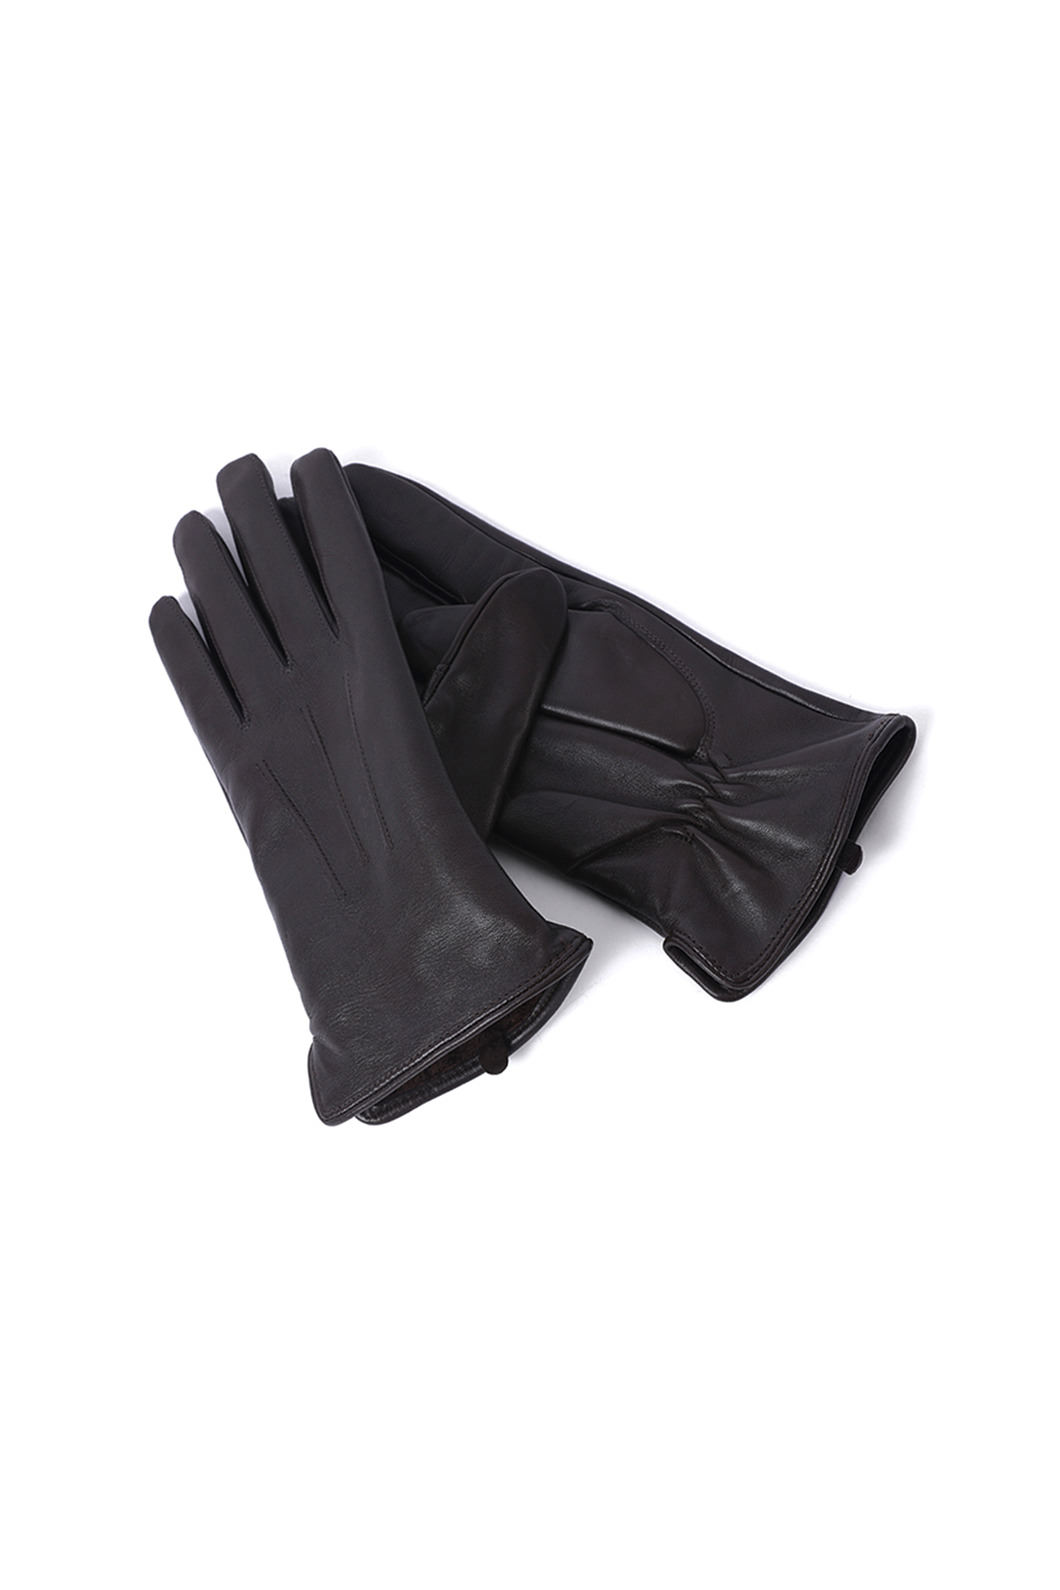 SHEEP SKIN REAL LEATHER GLOVE-2COLOR